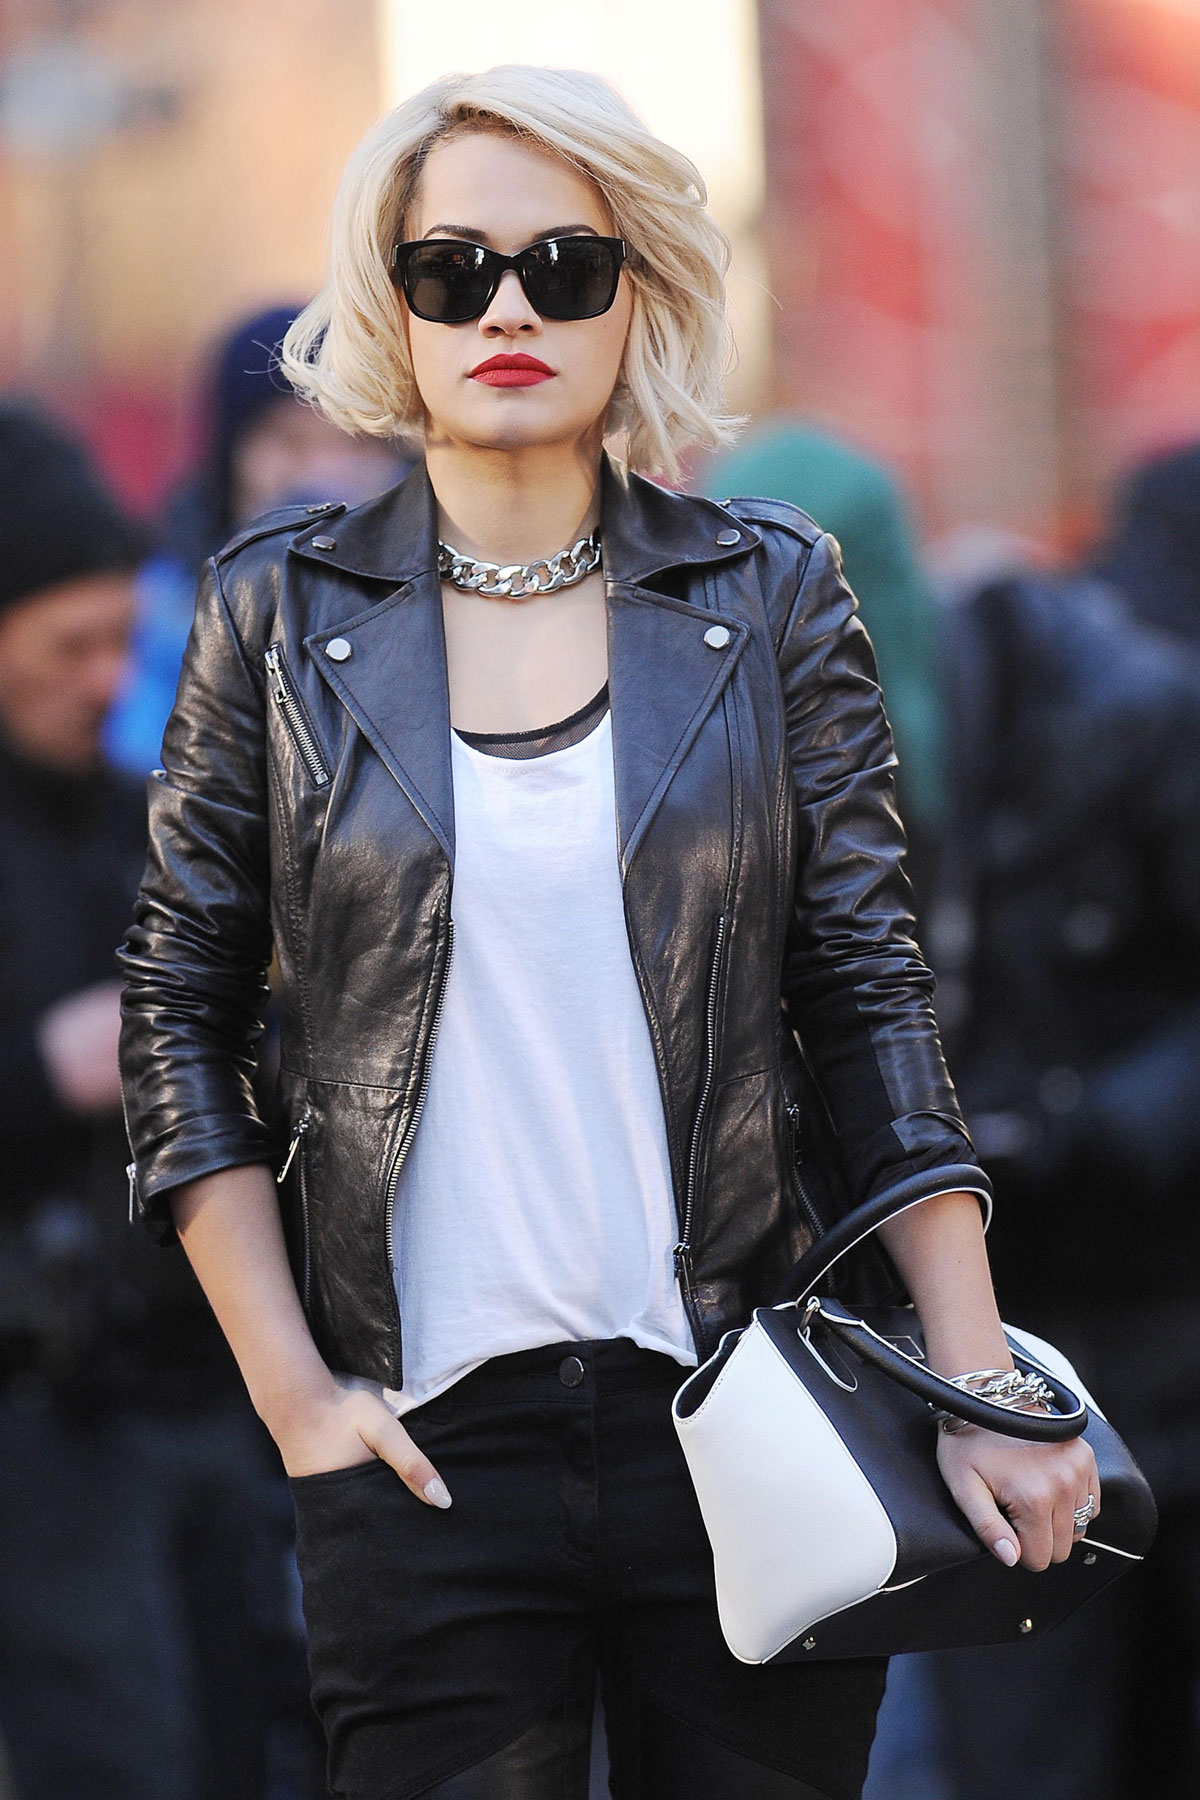 Rita Ora does a photo shoot in Times Square